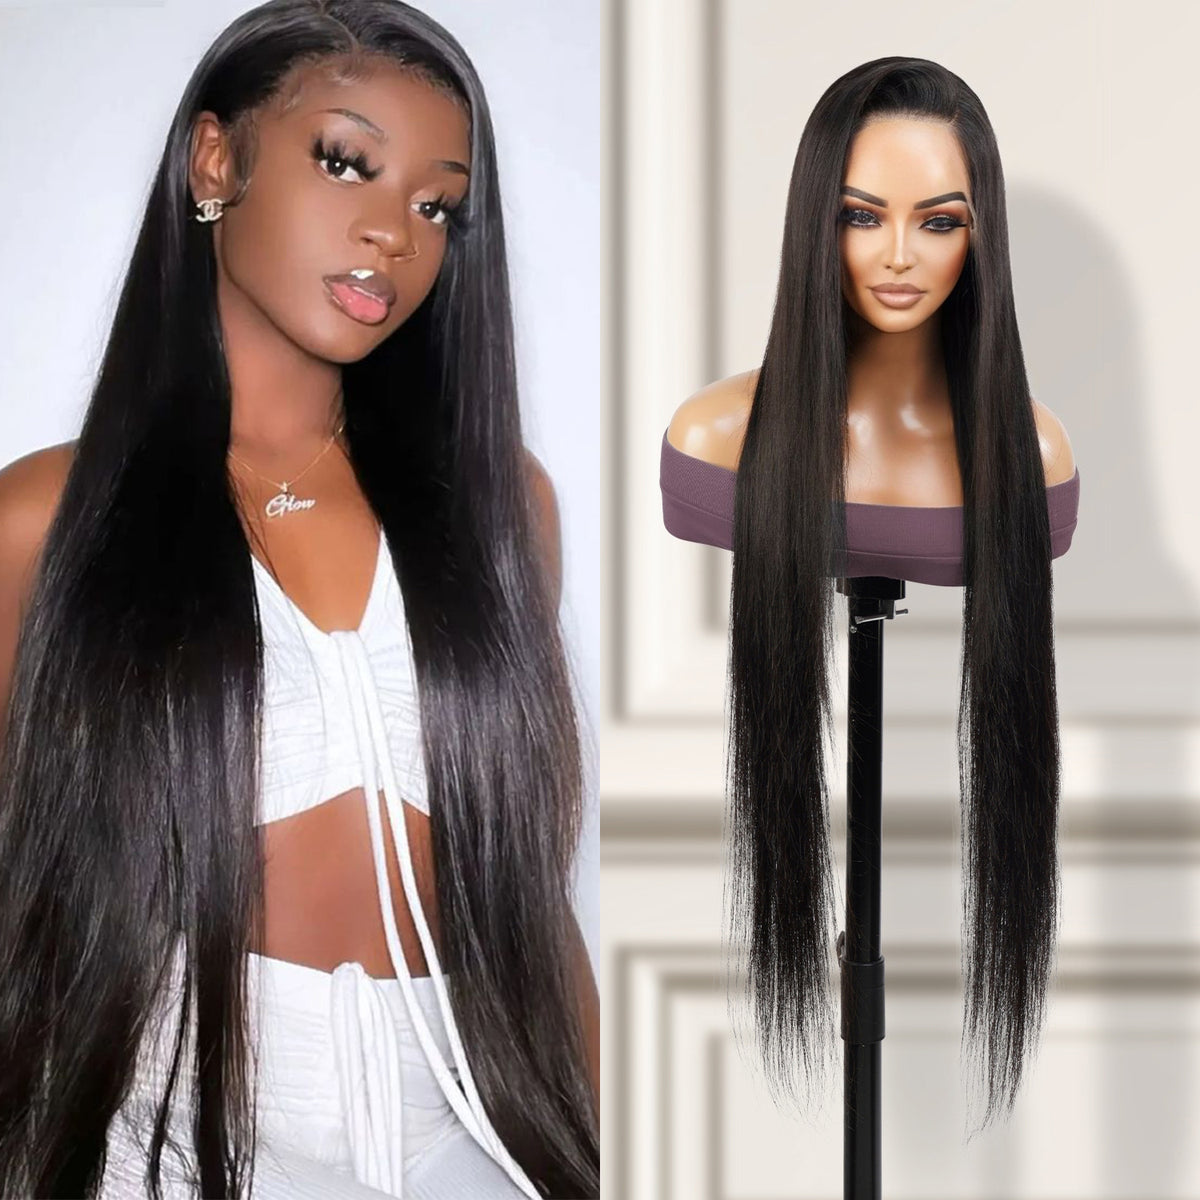 Super Straight Long Hair Lace Front Long Wig, Shop Long Wigs